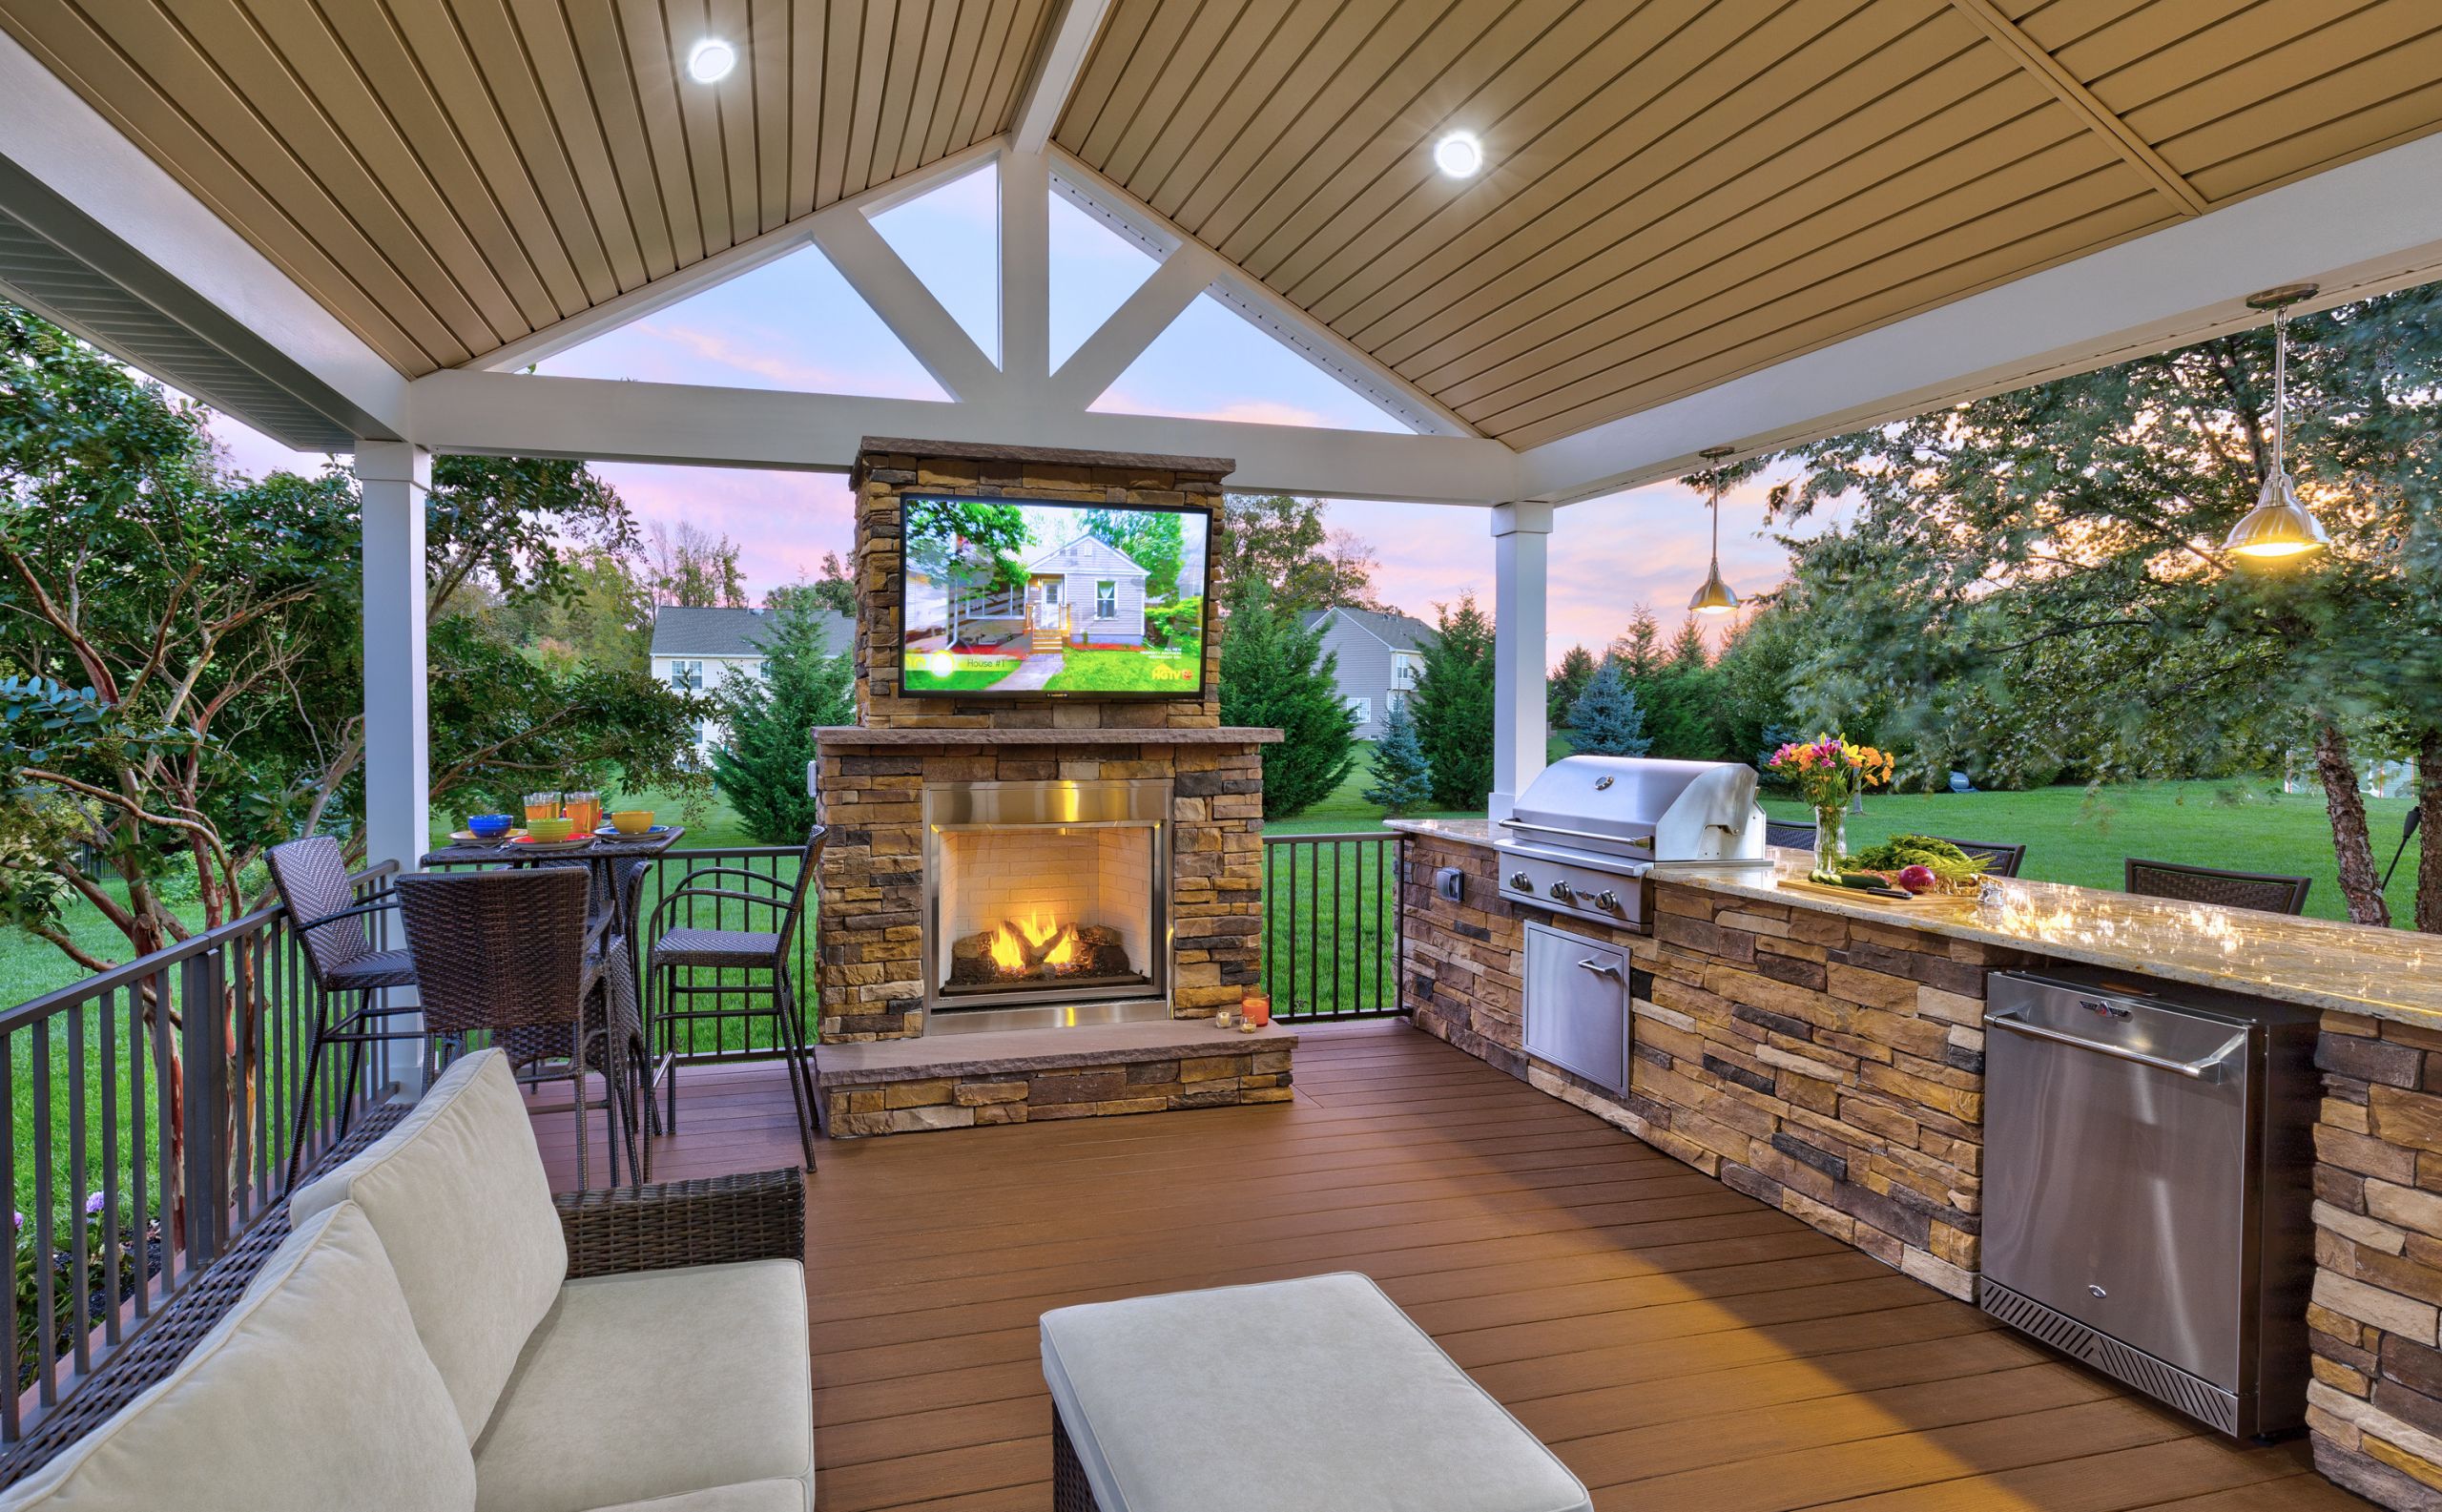 Outdoor Kitchen With Fireplace Designs
 outdoor kitchen fireplace television or sound system